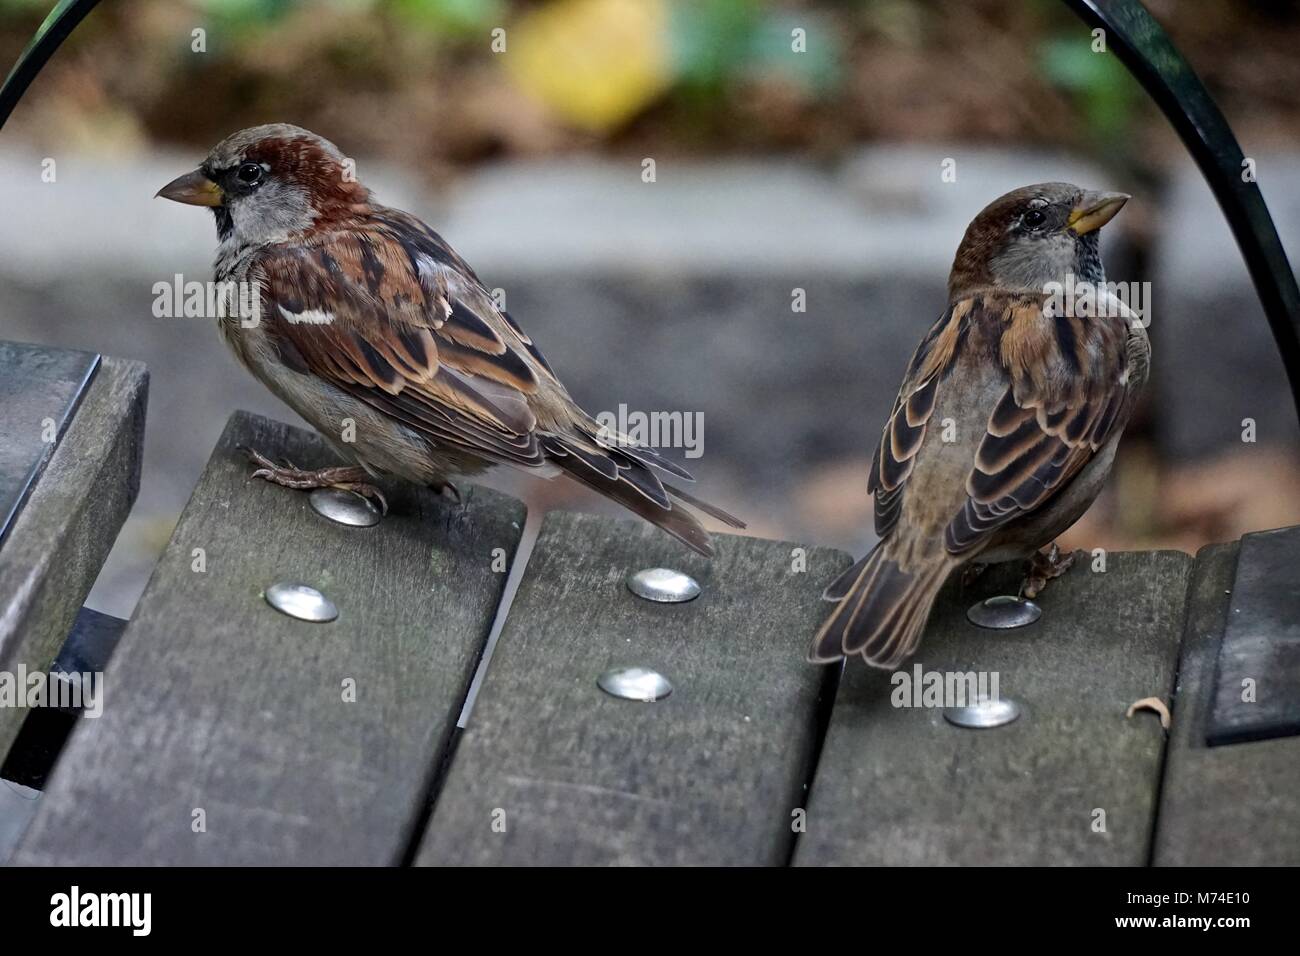 The house sparrow (Passer domesticus) is associated with human habitations, and can live in urban or rural settings. Stock Photo